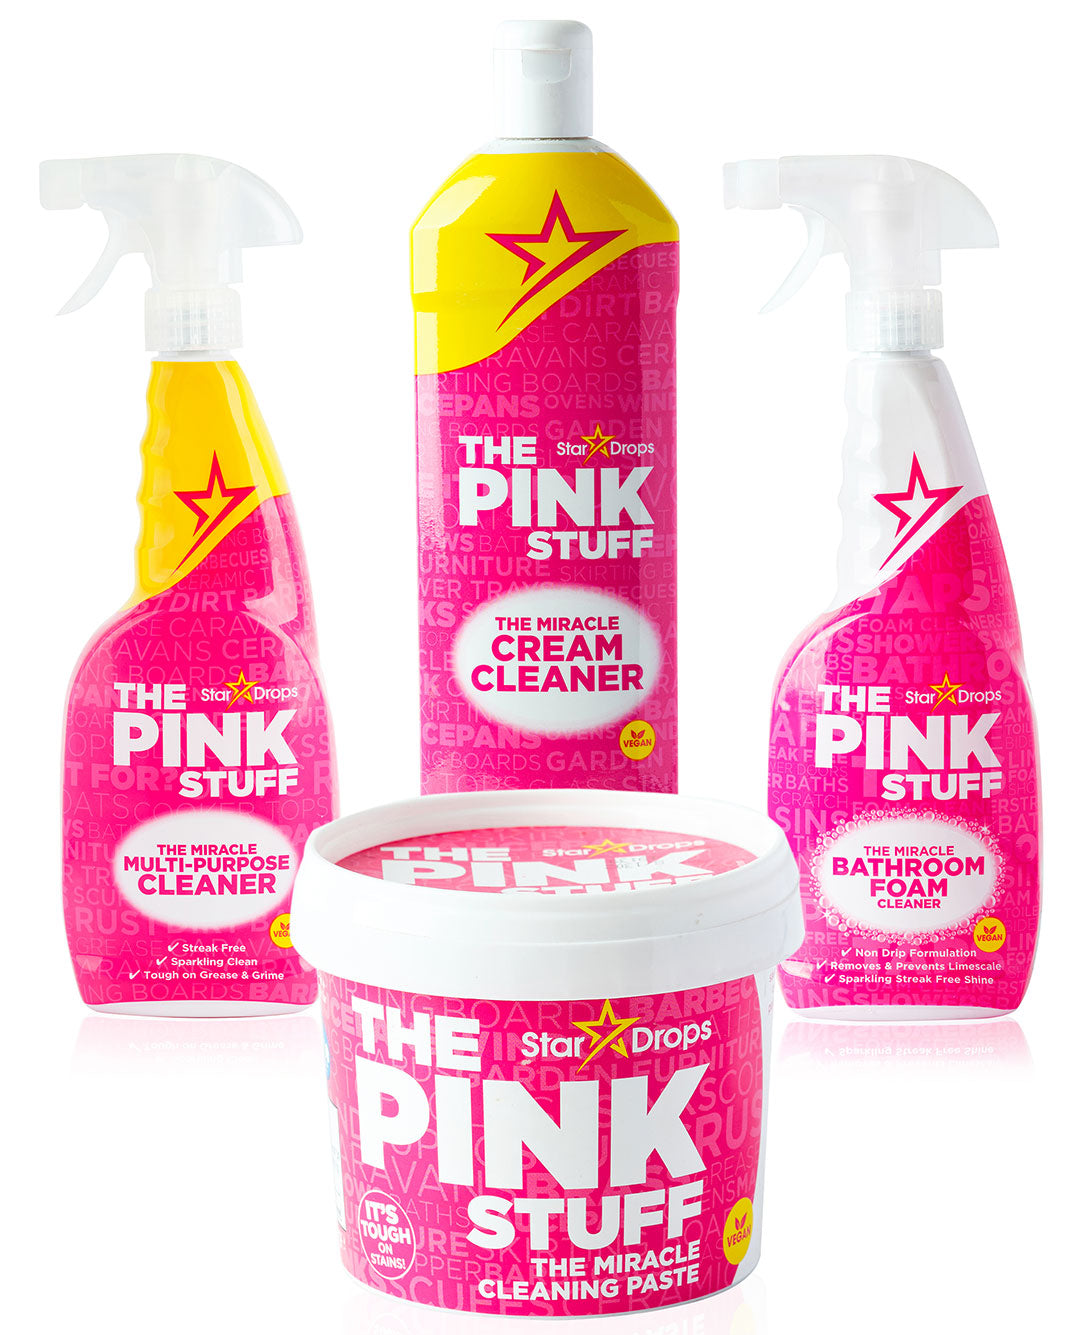 THE PINK STUFF 750 ml Miracle Cream Cleaner (12-Pack) 100547426